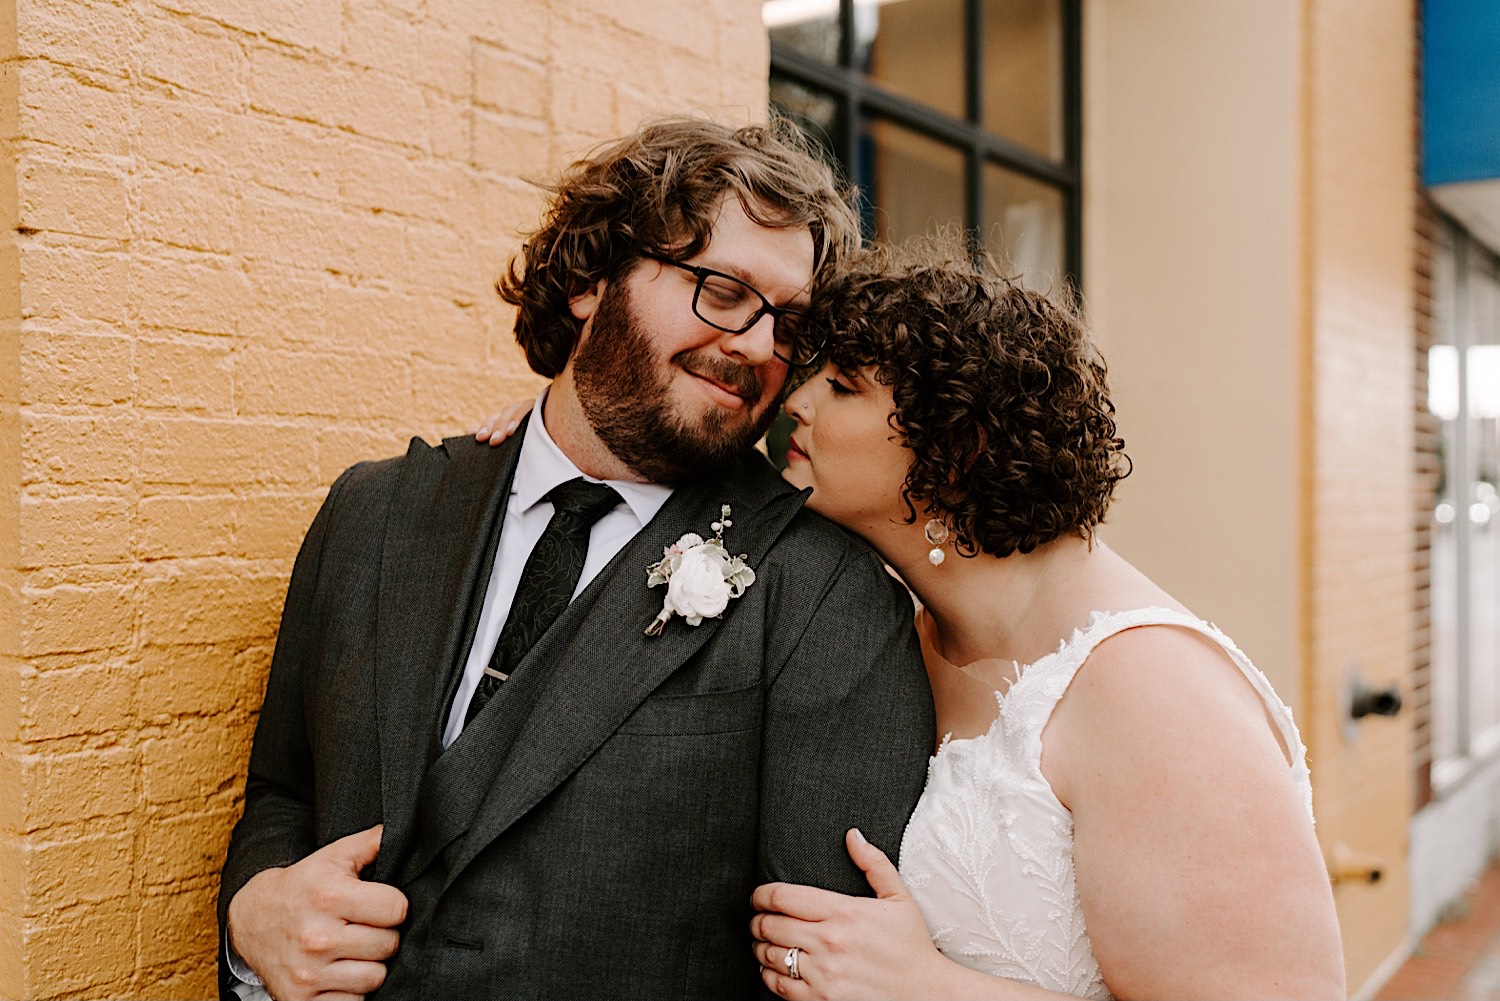 A bride leans in to kiss the groom while standing behind him as the two stand in front of a yellow brick wall outside their wedding venue The Atrium in Milwaukee